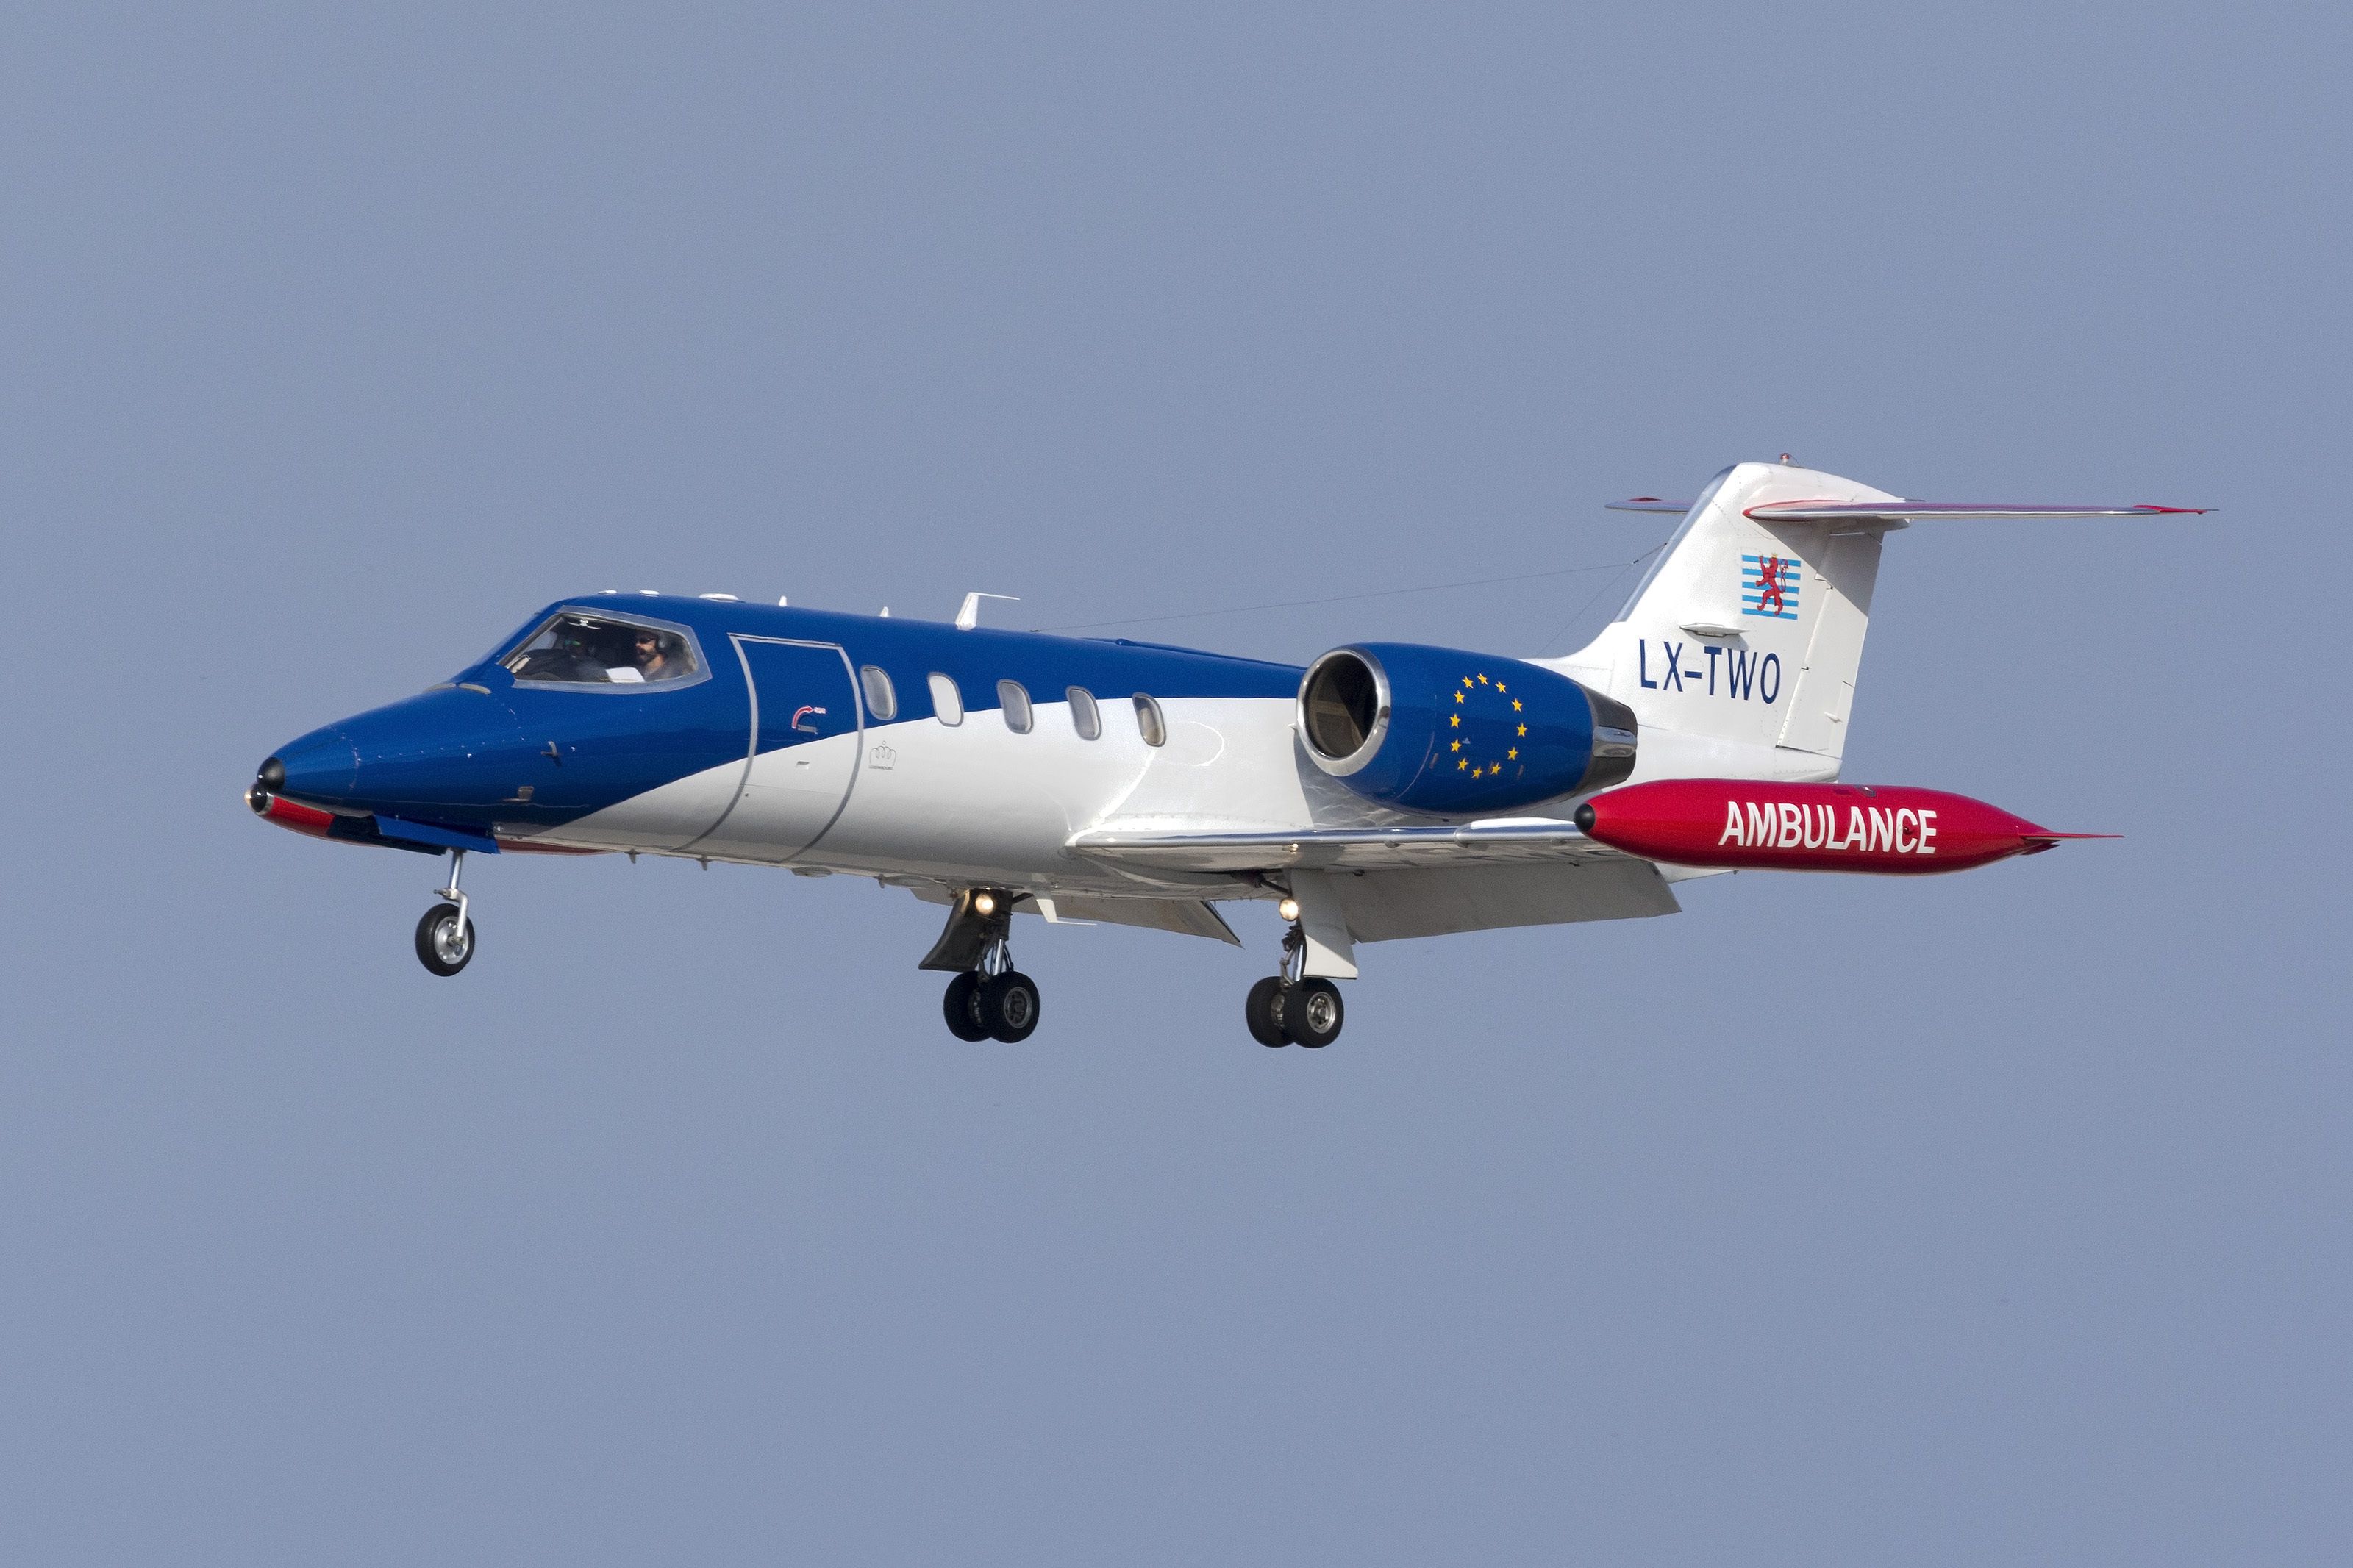 A Luxembourg Air Ambulance Learjet 35A/ZR flying in the sky.